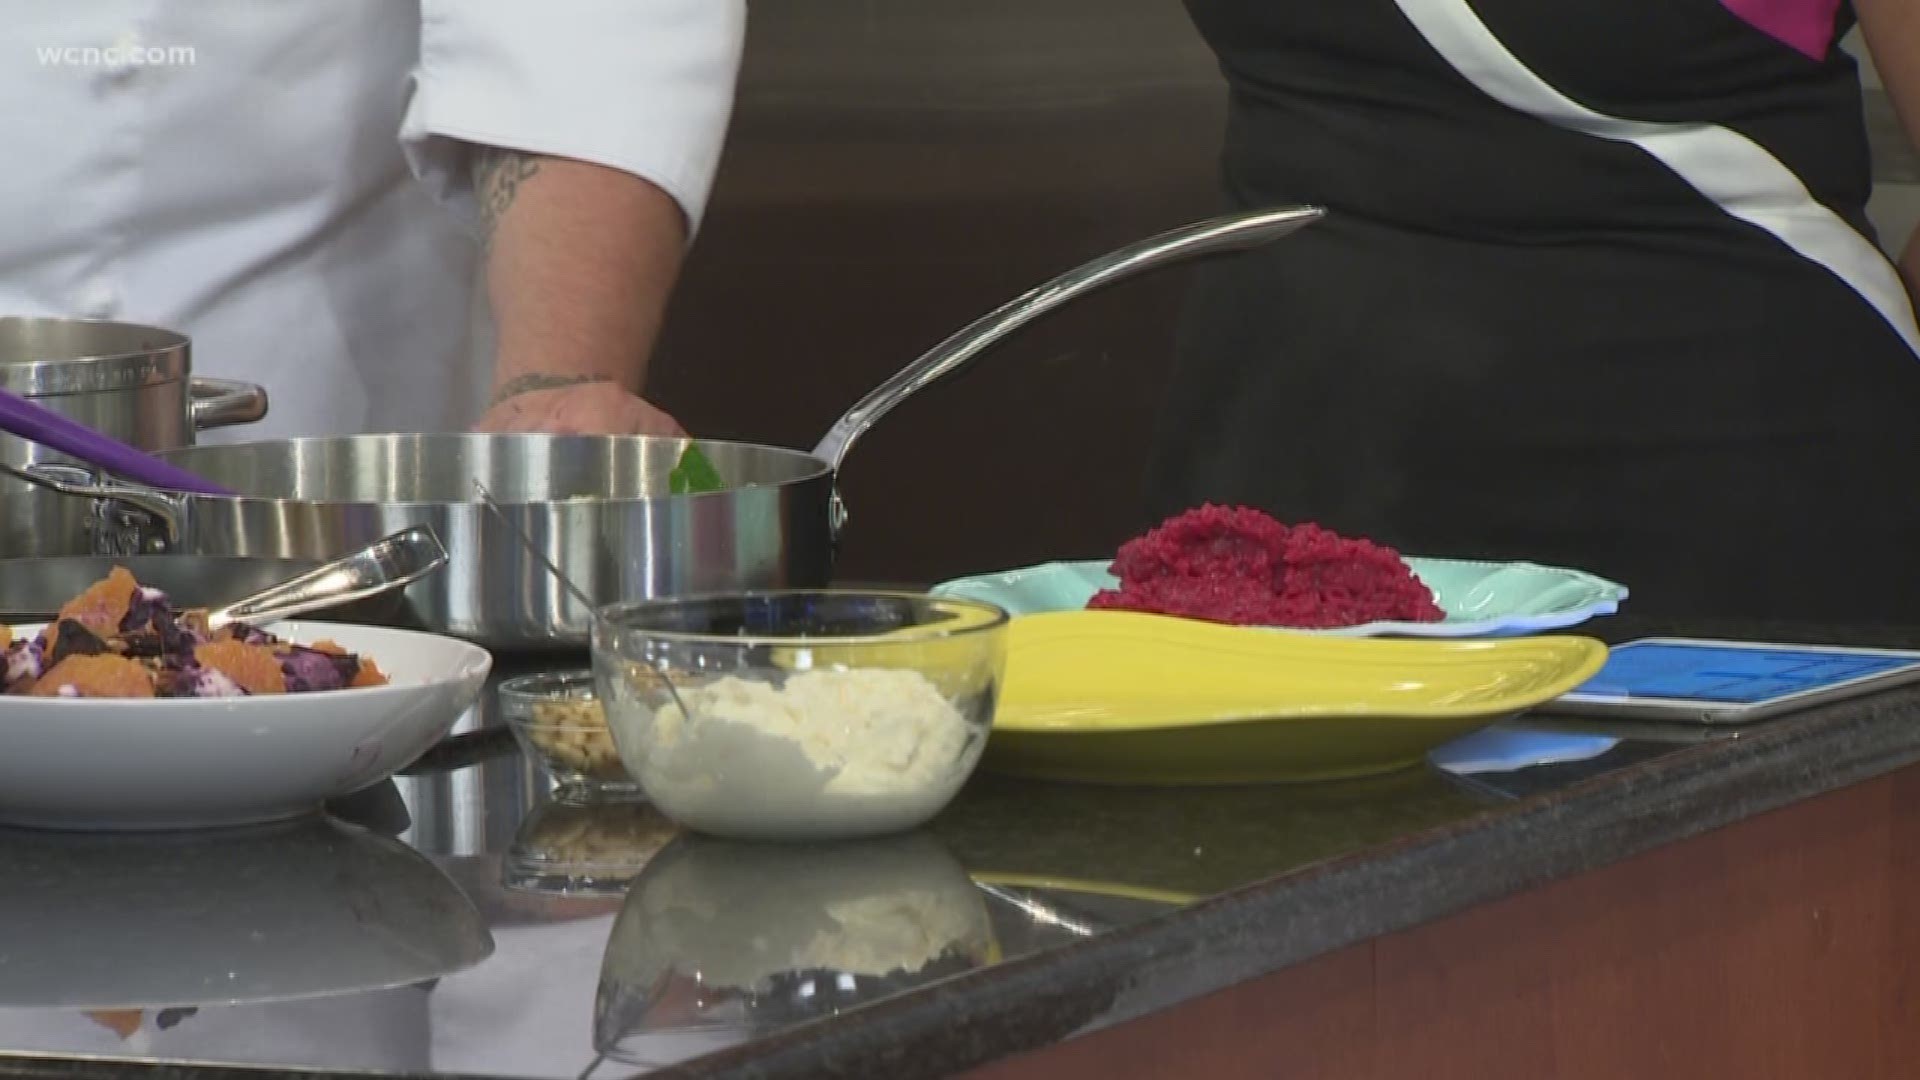 Chef Ross Purple makes a colorful spring risotto filled with health benefits and flavor!